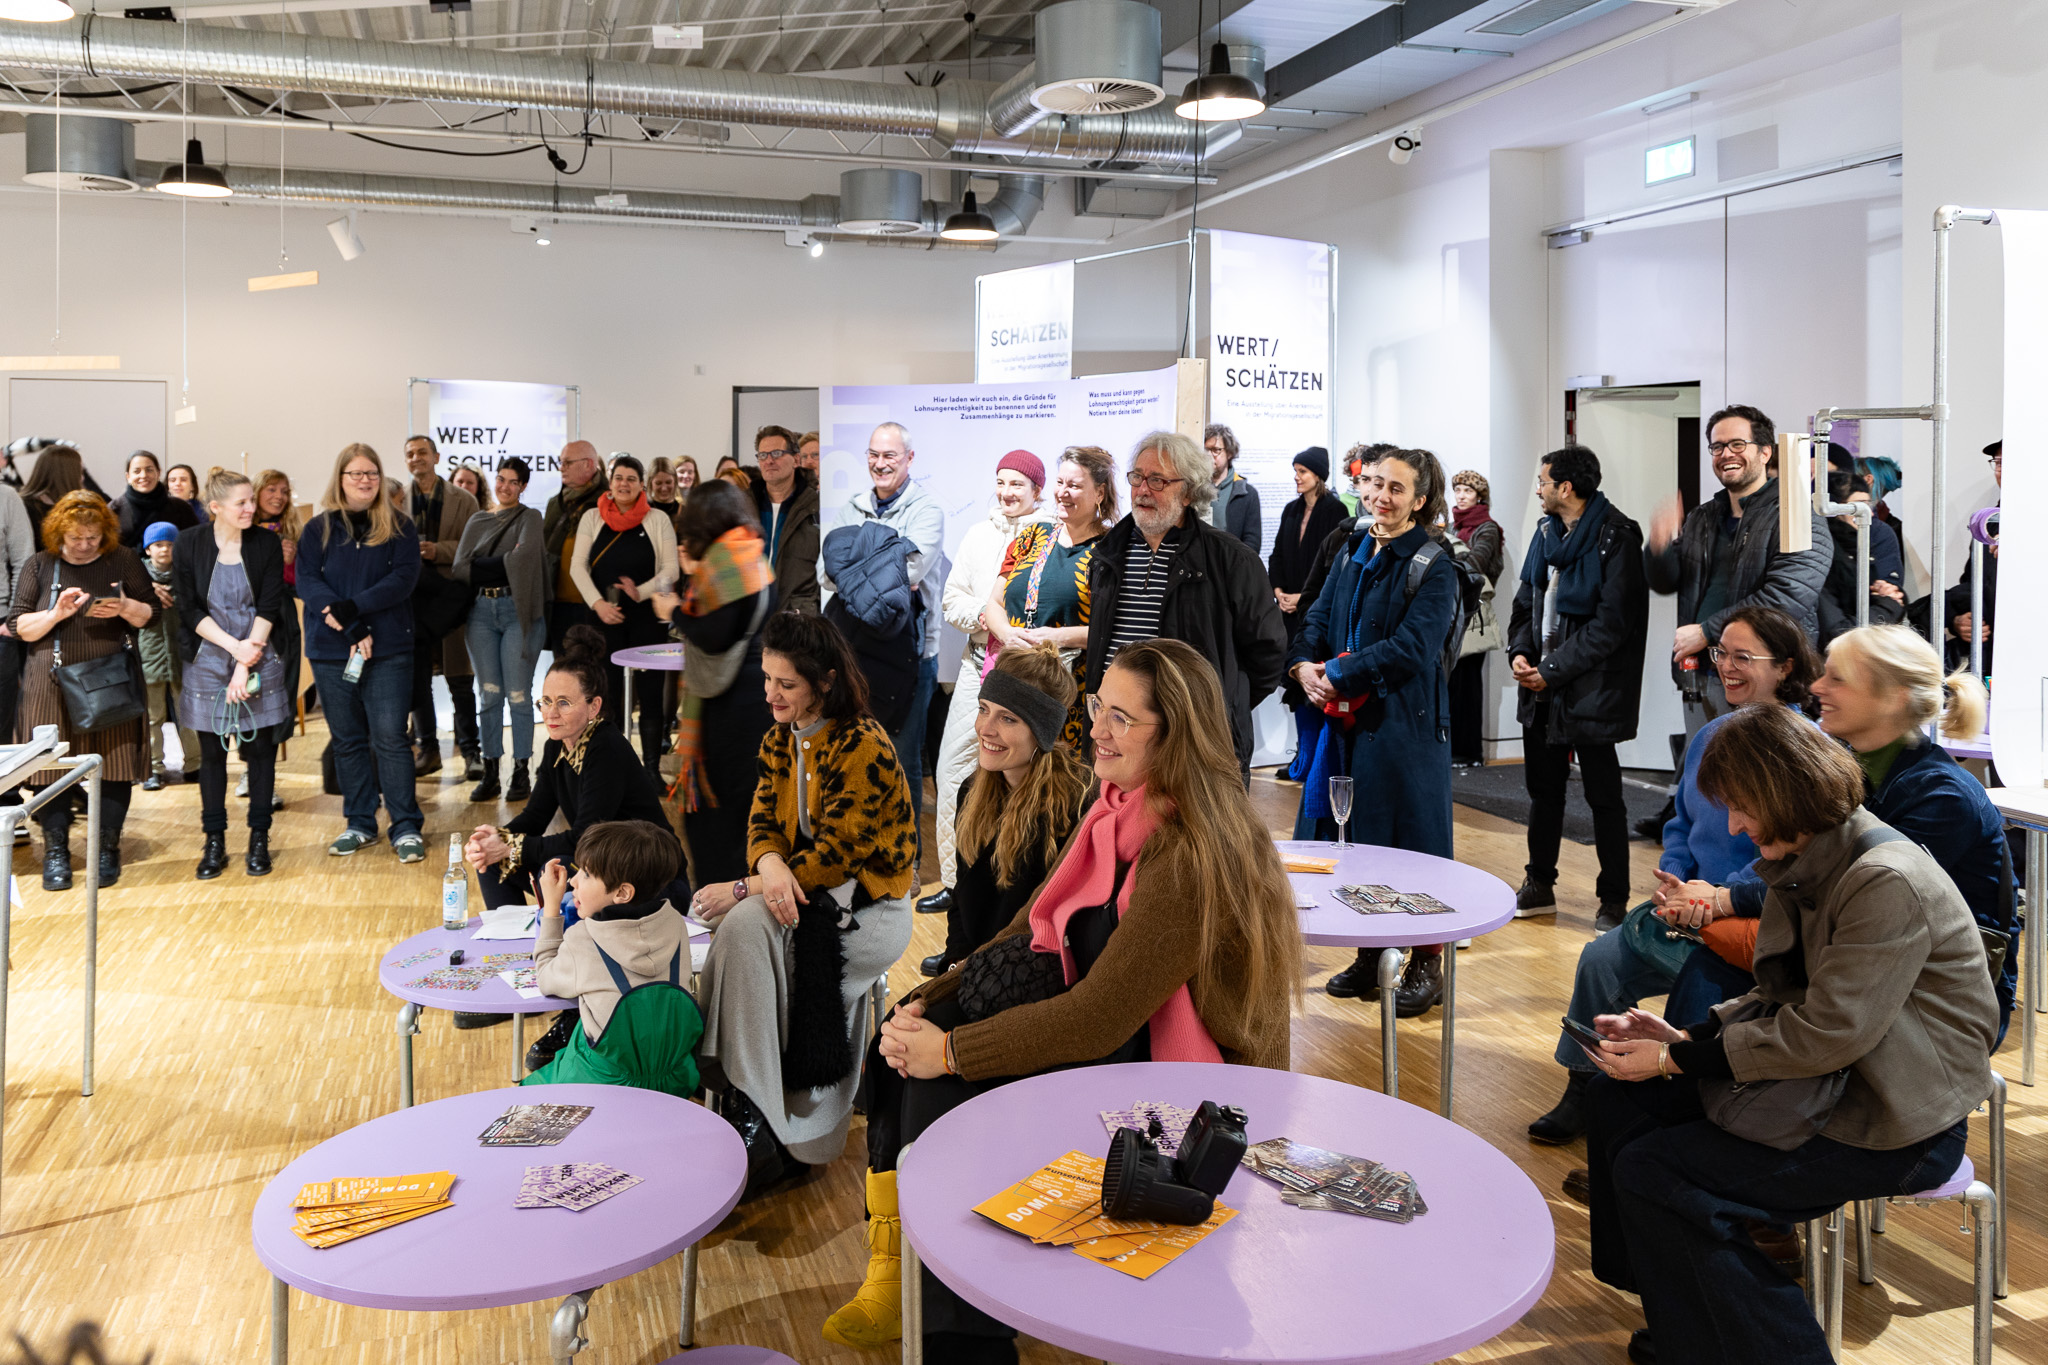 On Friday, 19 January 2024, the DOMiDLabs project team celebrated the opening of the exhibition together with participants, sponsors, friends and colleagues. Photo: Vincent Dino Zimmer - Kollektiv Plus X